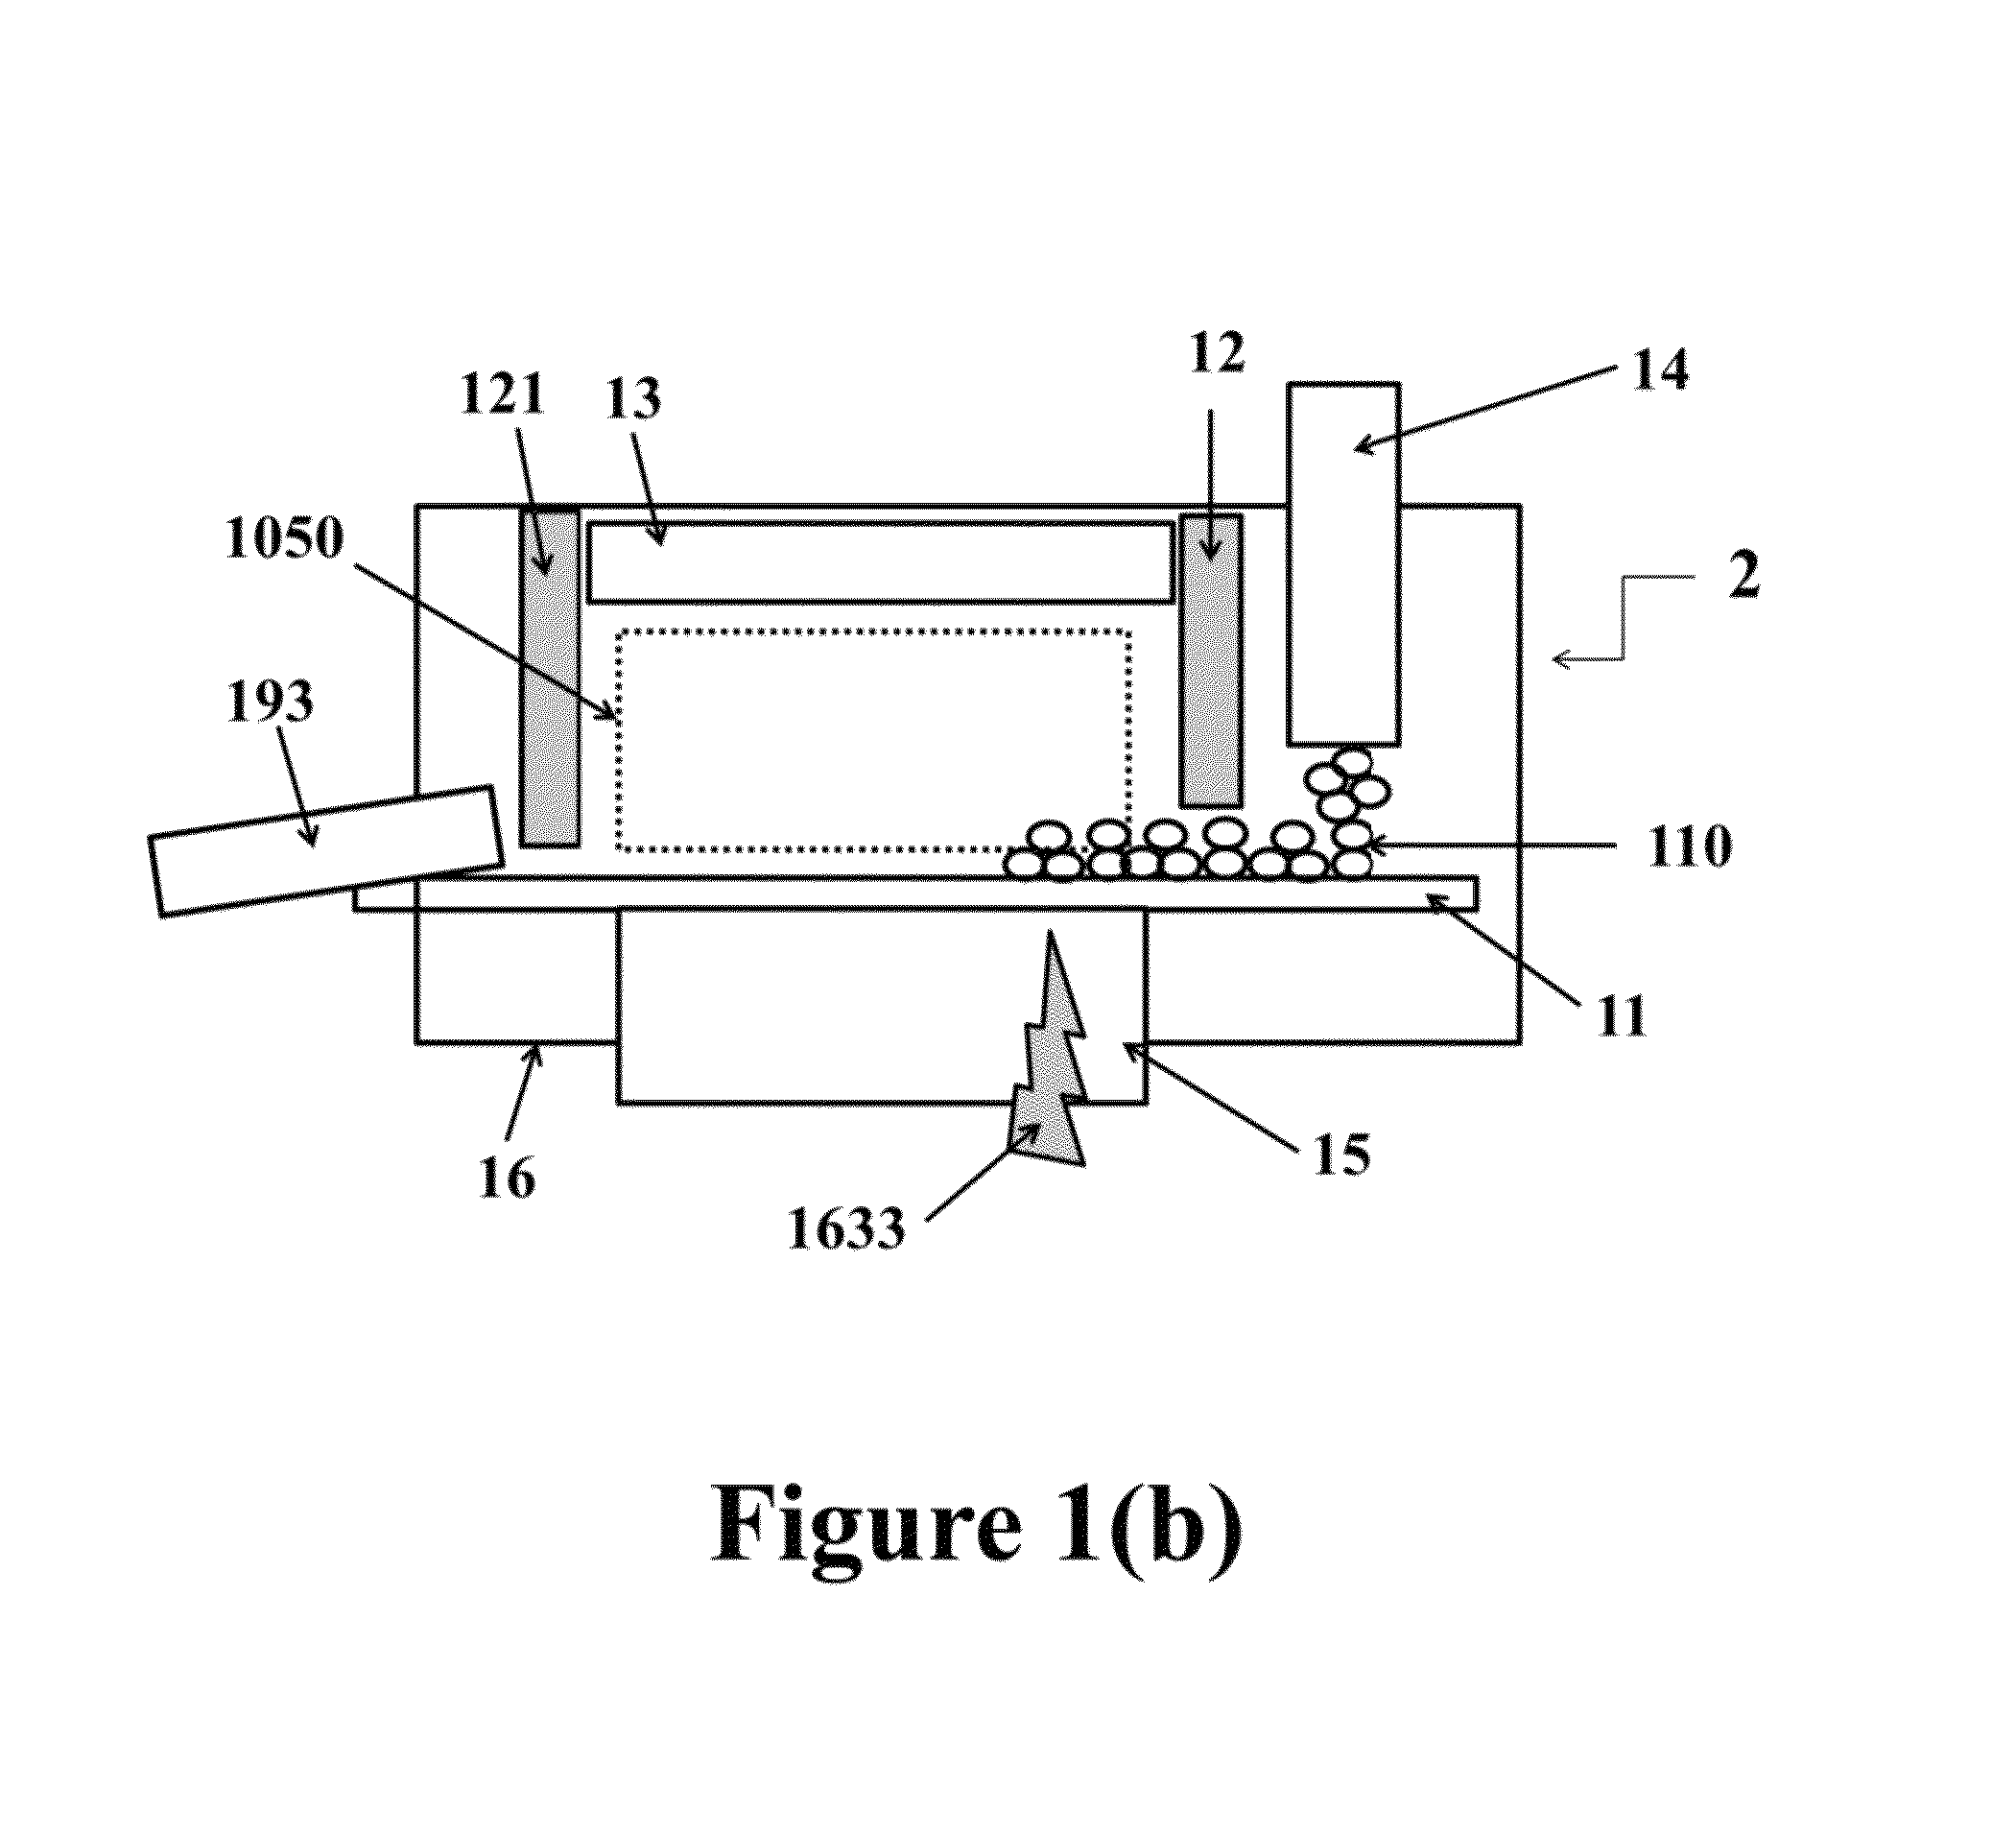 Microwave assisted flash pyrolysis system and method using the same